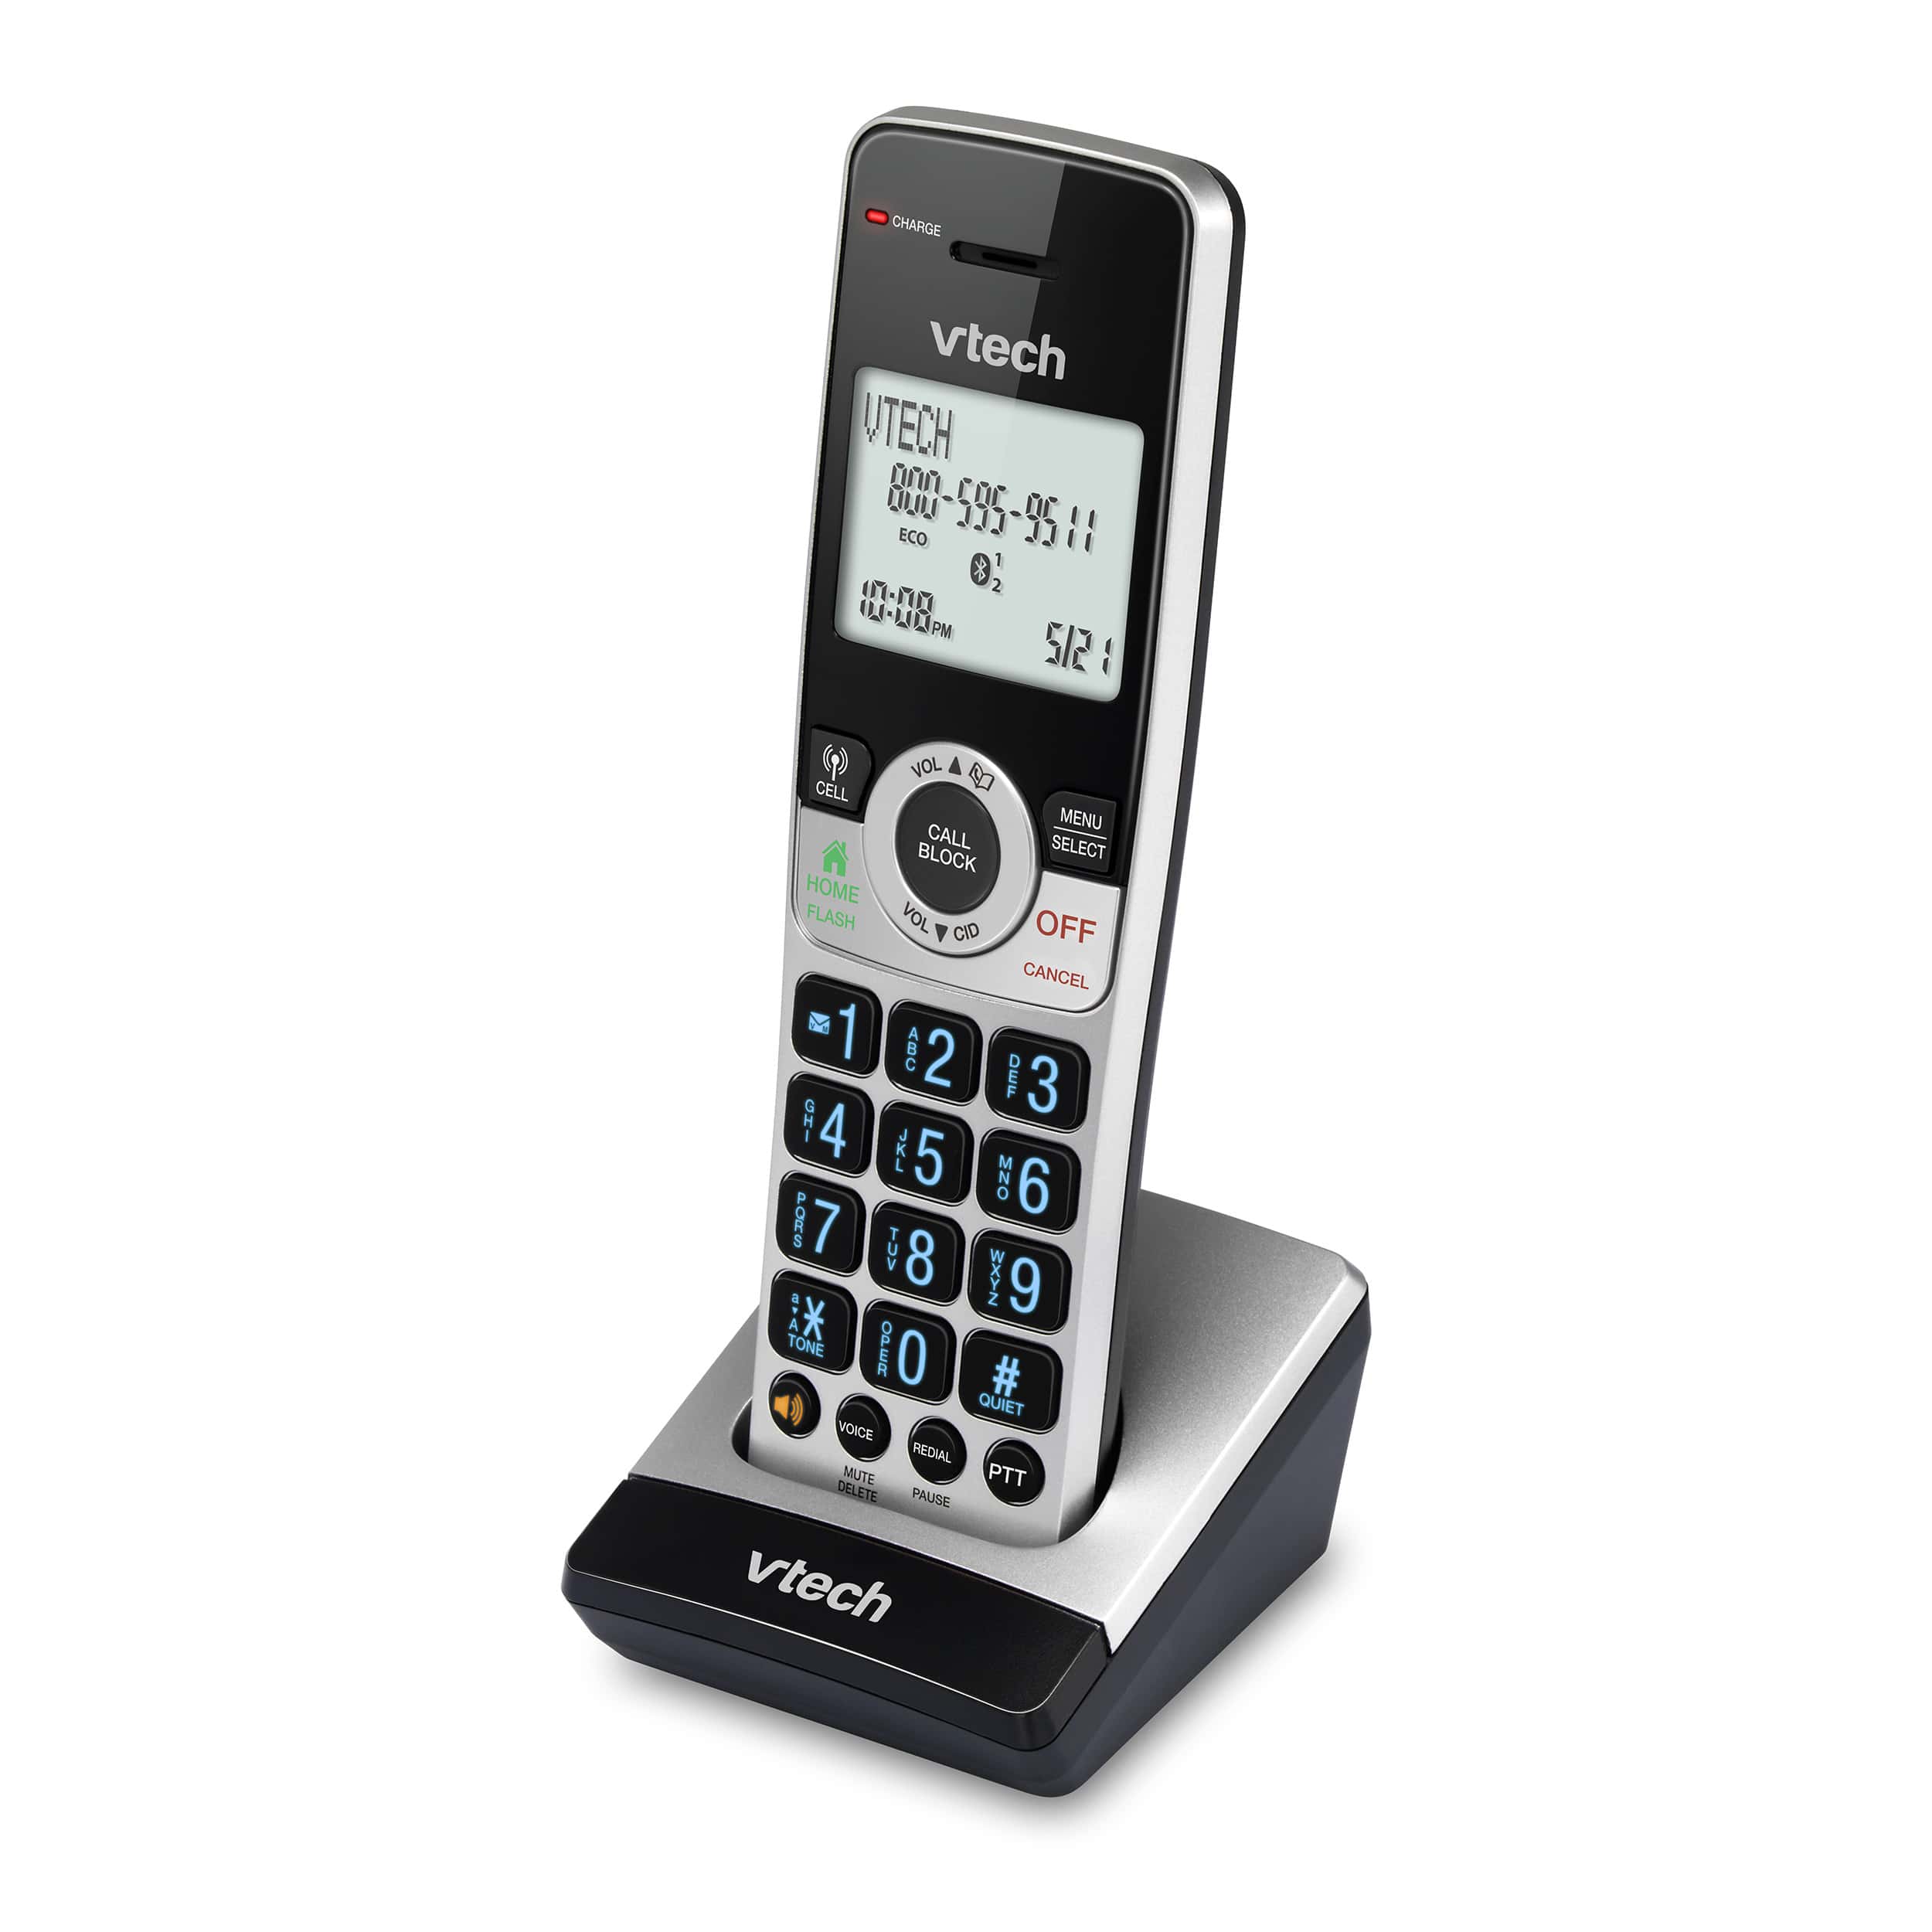 Accessory Handset with Bluetooth Connect to Cell, and Smart Call Blocker - view 2